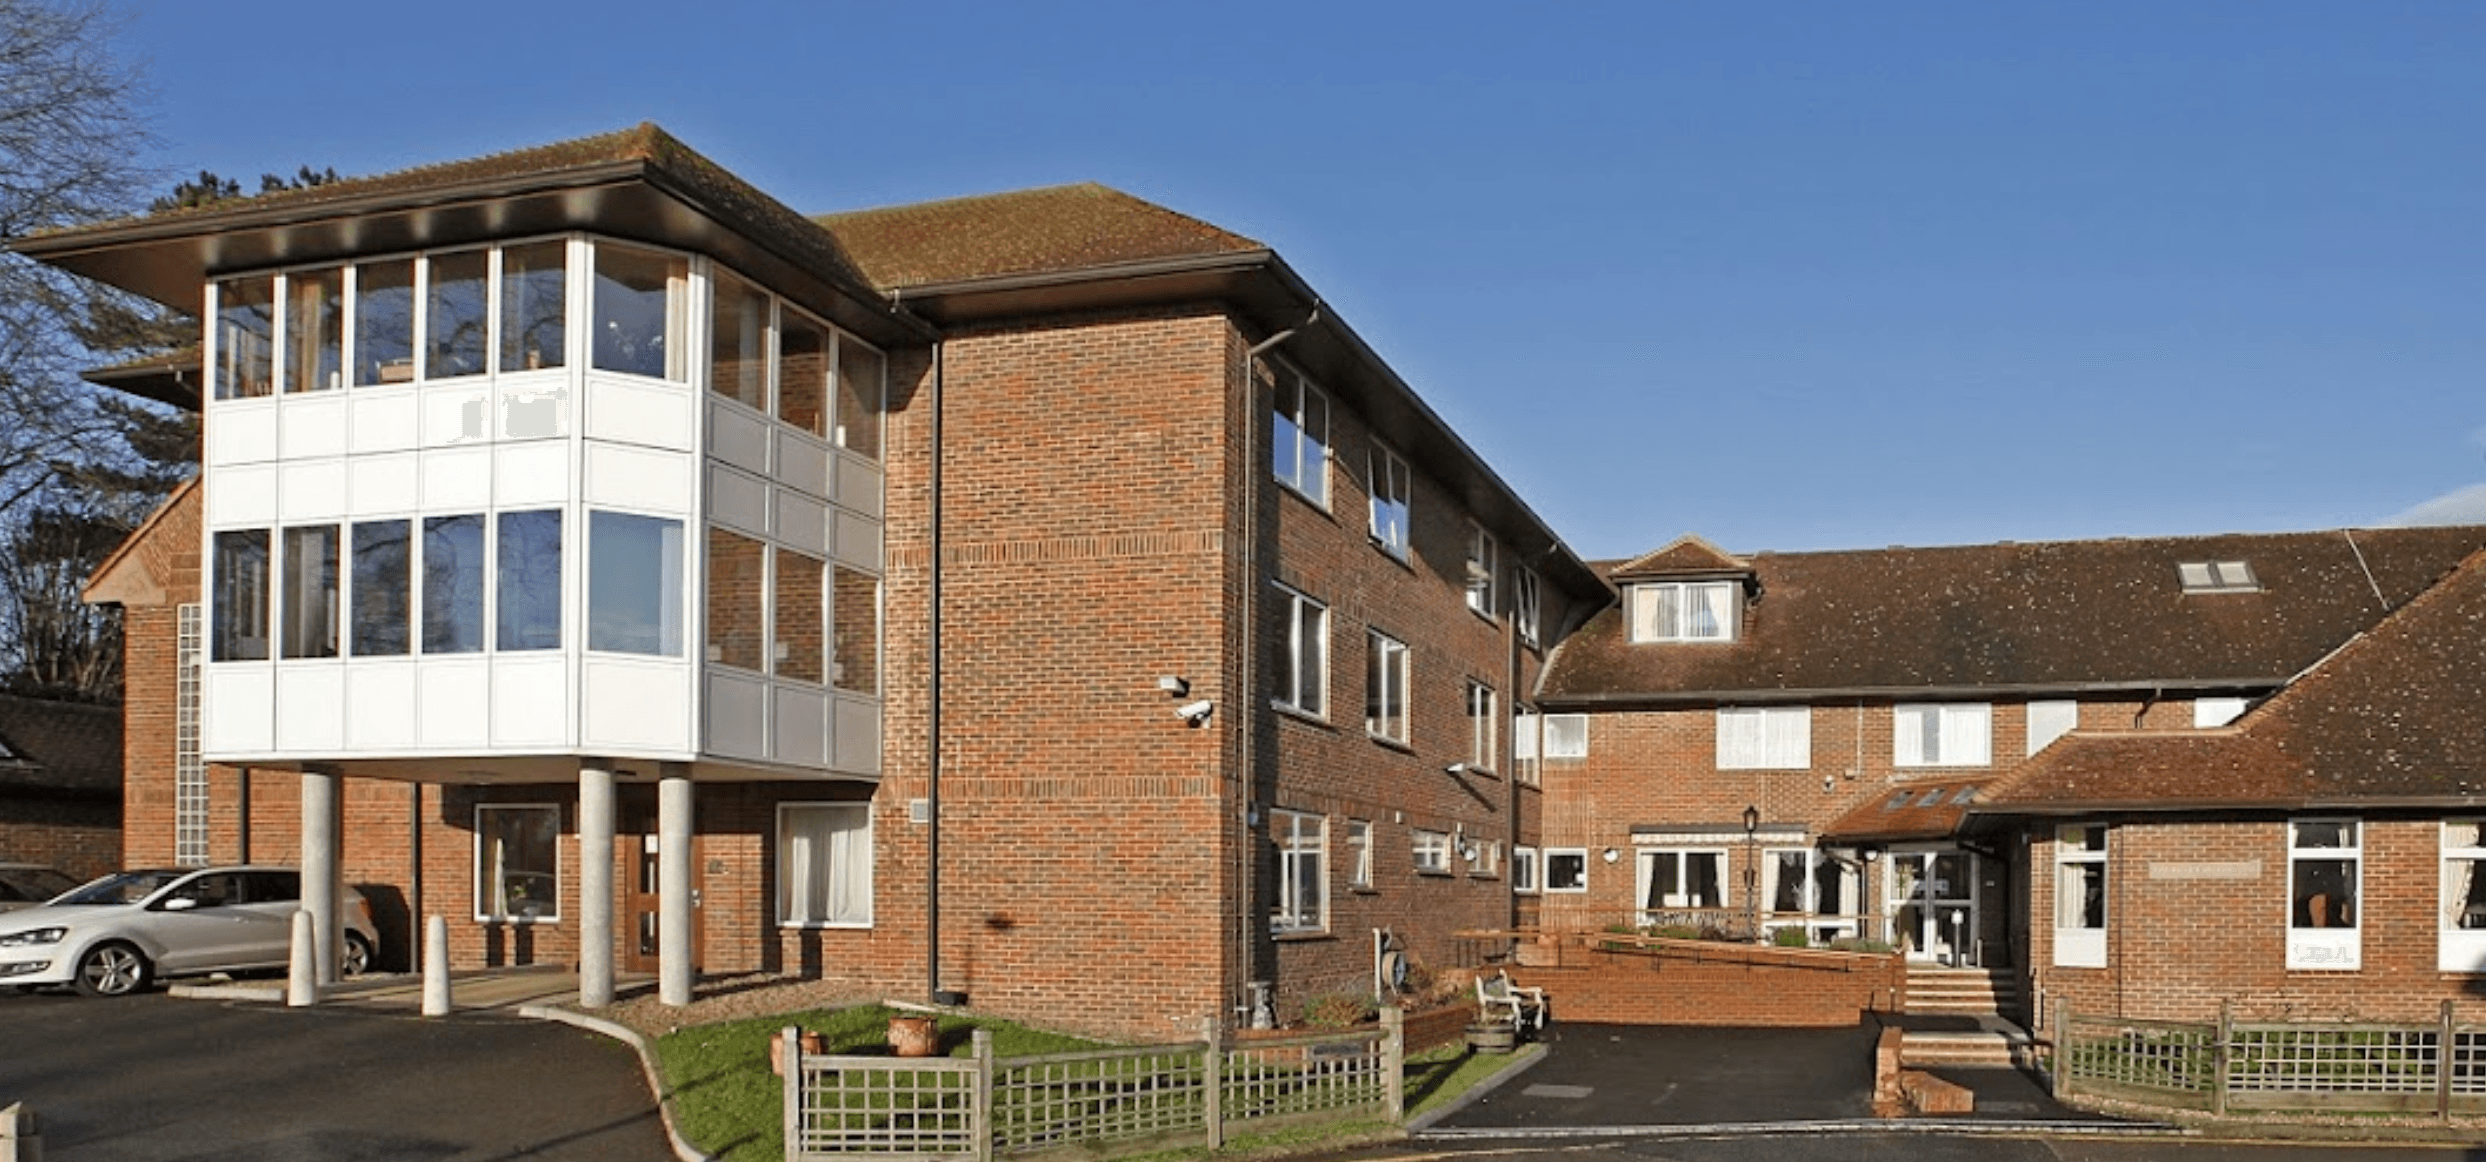 David Greesham House Residential Care Home in Oxted 1